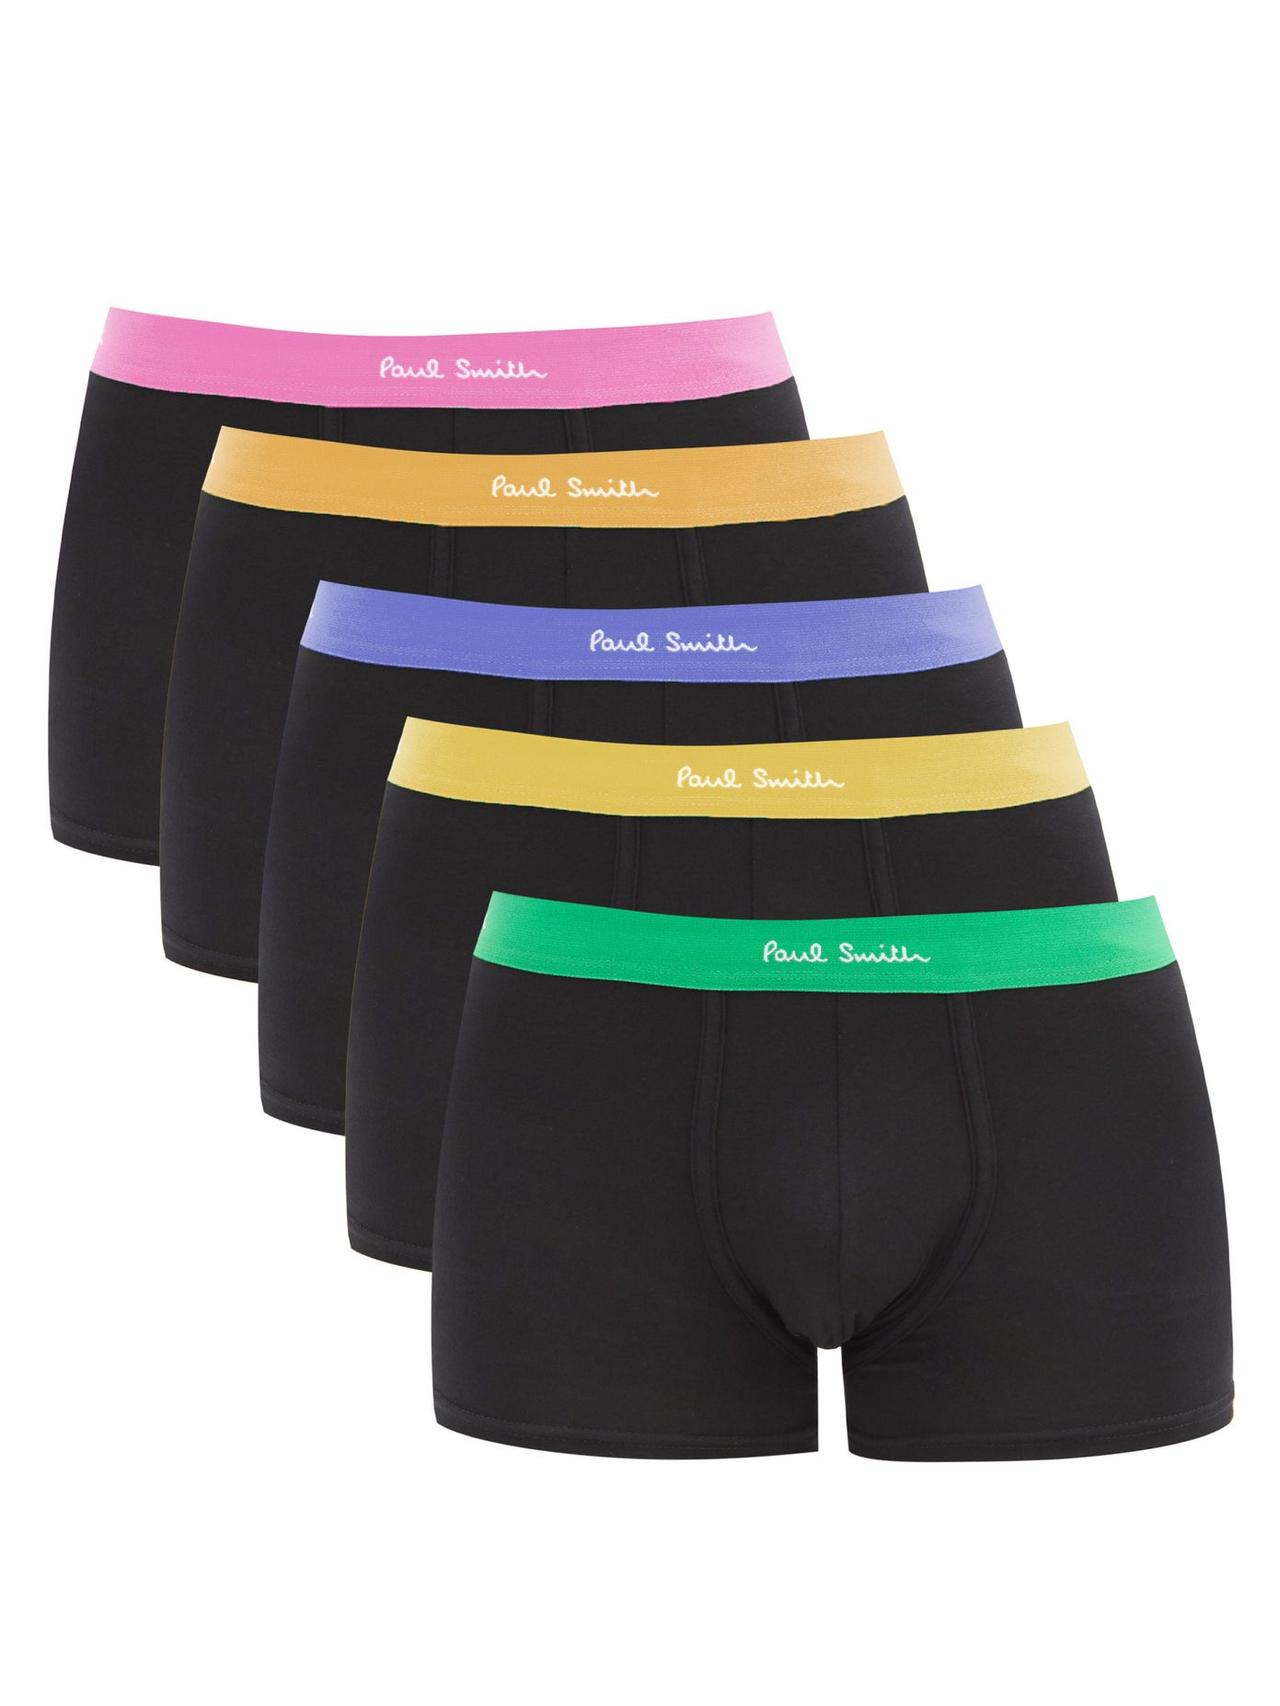 PERSONALISED boxer shorts EMBROIDERED Groom Wedding Cotton Anniversary ANY TEXT? 